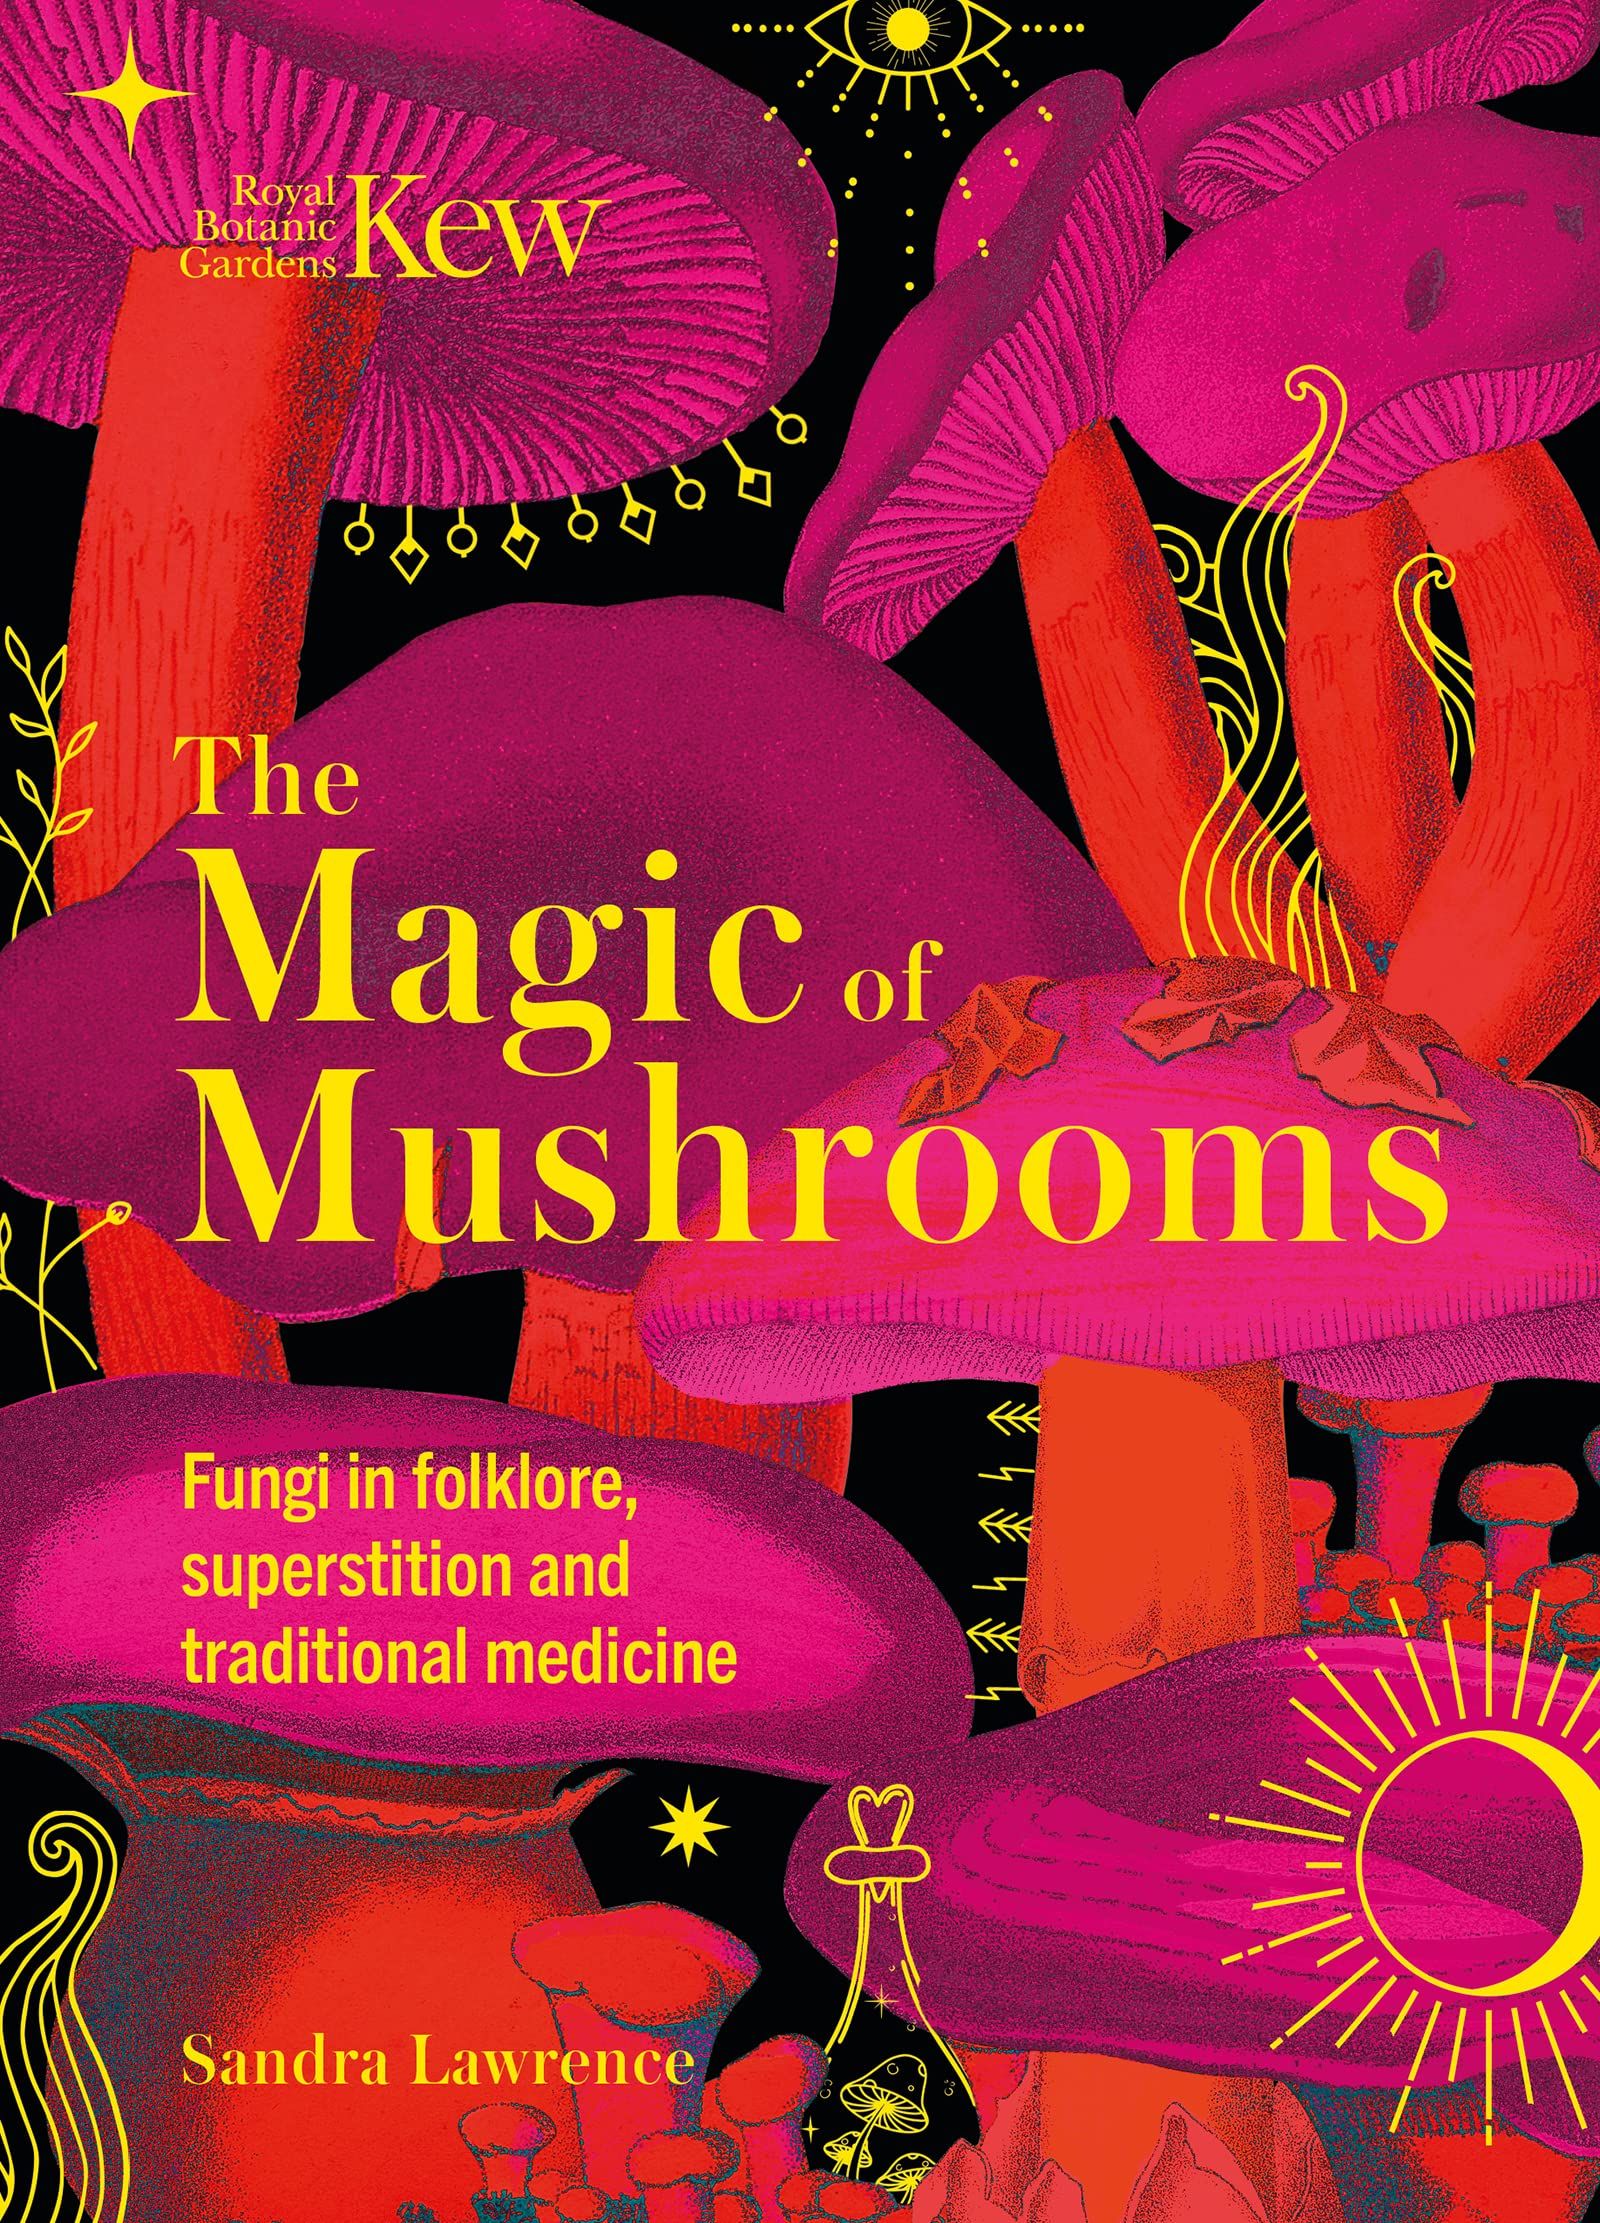 The Magic of Mushrooms: Fungi in folklore, superstition and traditional medicine book cover